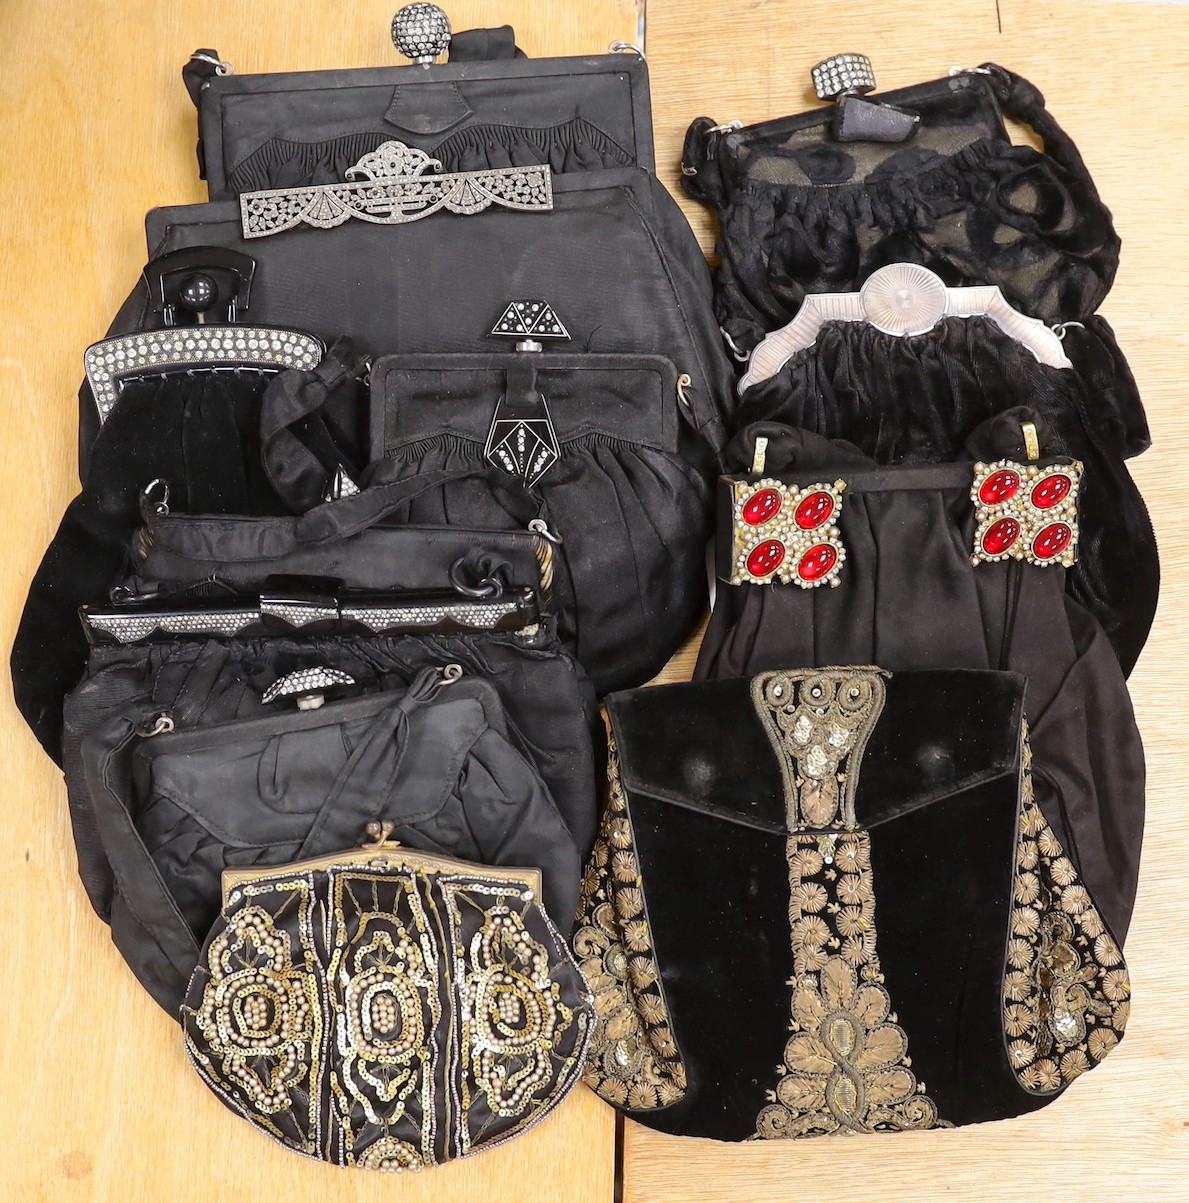 A 1930’s evening bag with silver frame, seven 1930’s-40’s evening bags with diamante encrusted Bakelite frames and clasps, a costume jewelled bag and two gilt and sequin bags